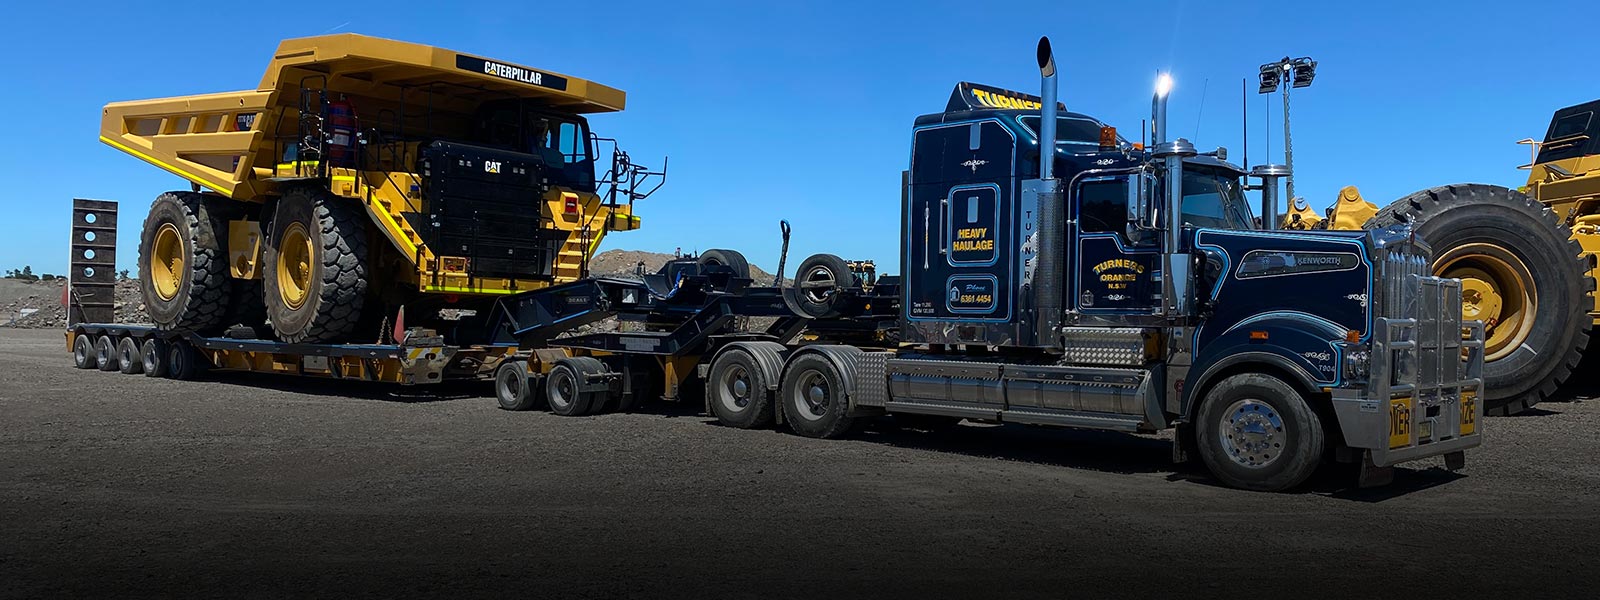 Get Easy And Fast Transportation Of Heavy Mining Equipment And Freight With Our Expert Team